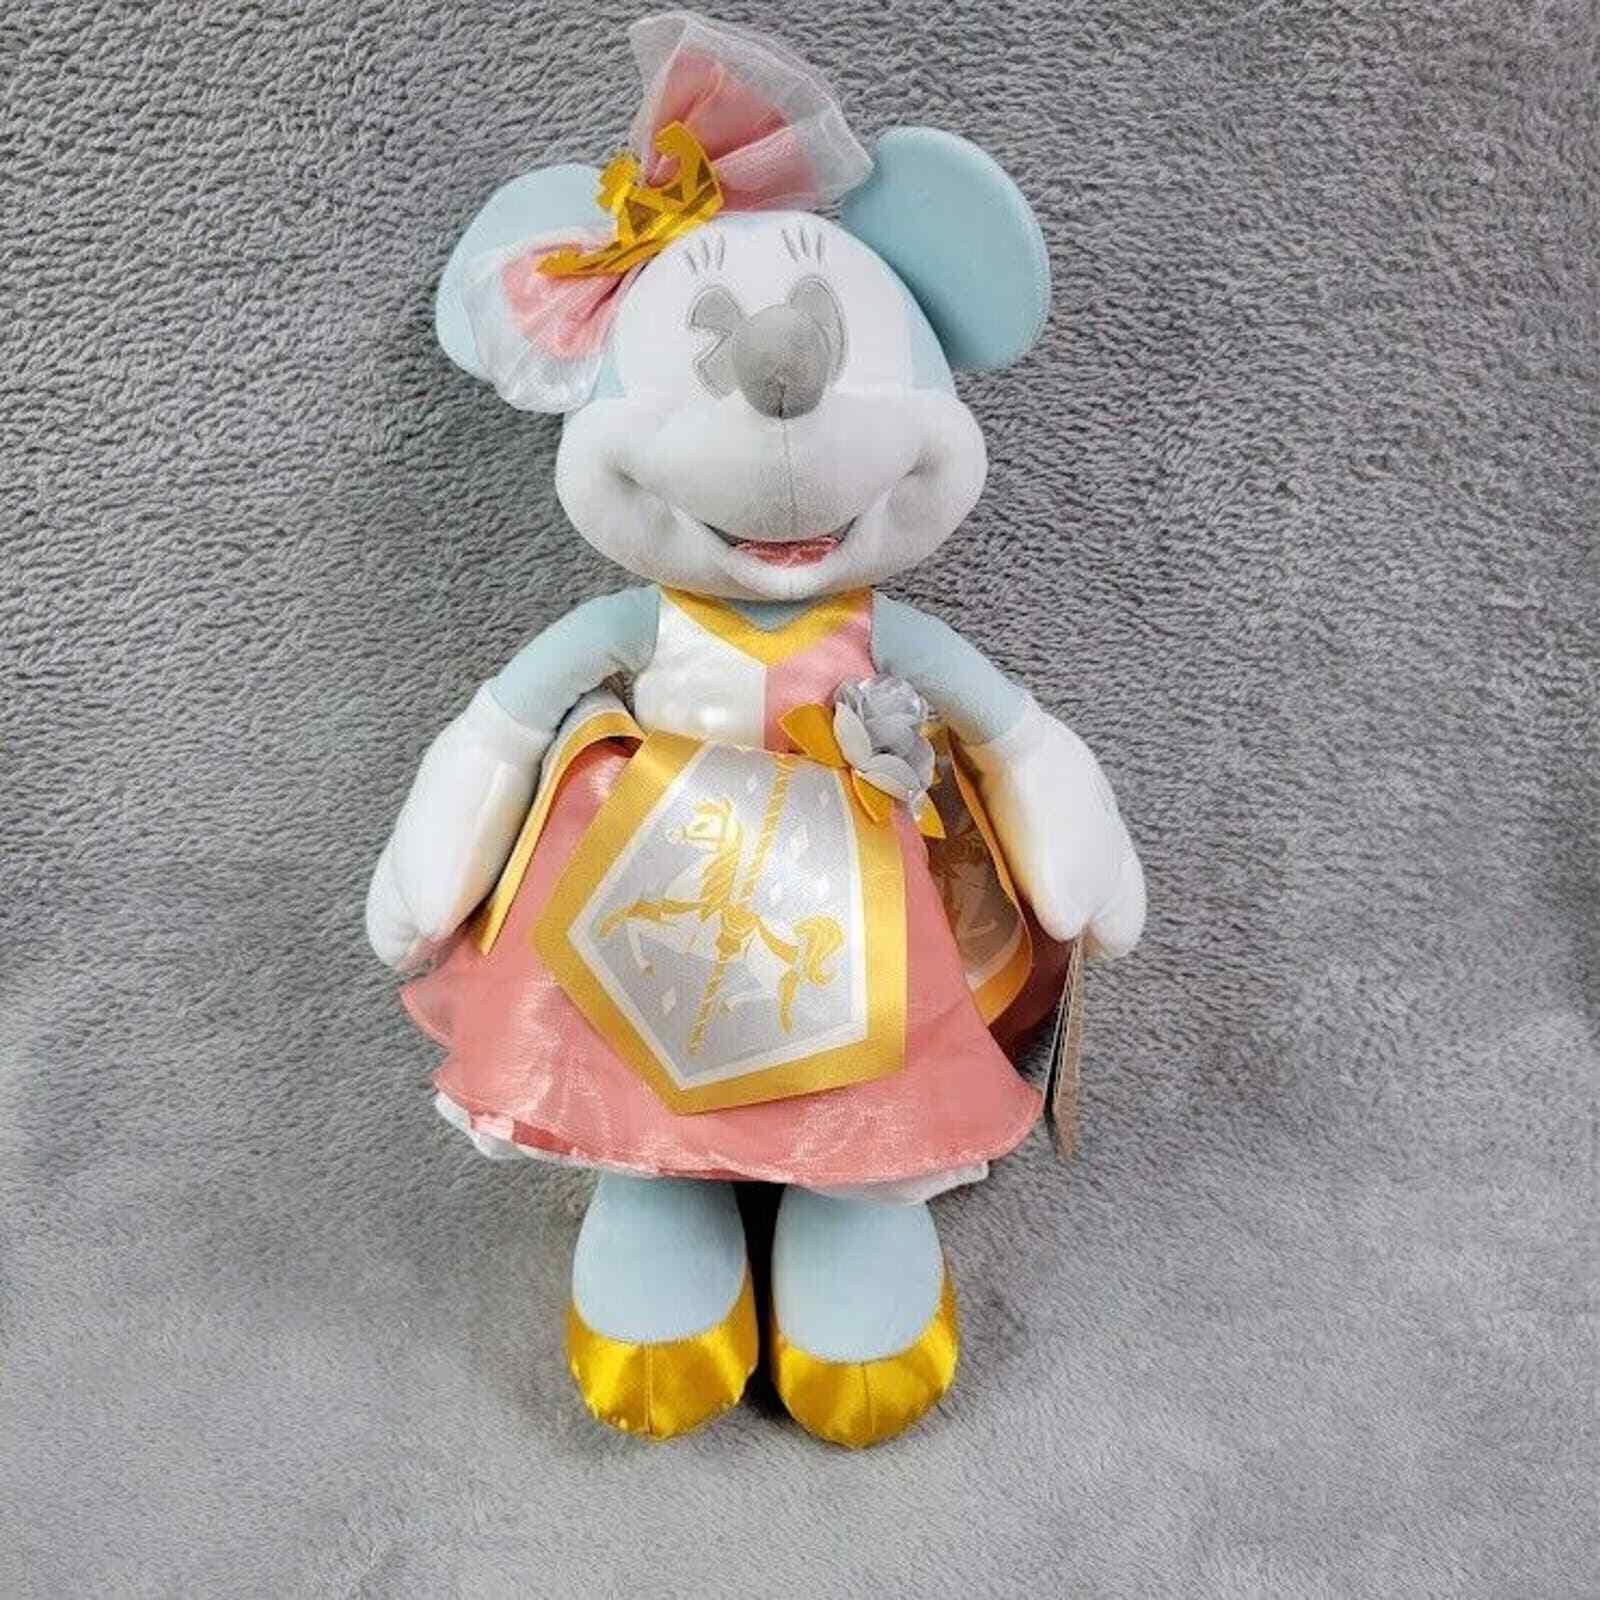 Disney Minnie Mouse The Main Attraction Plush King Arthur Carousel July 7 of 12